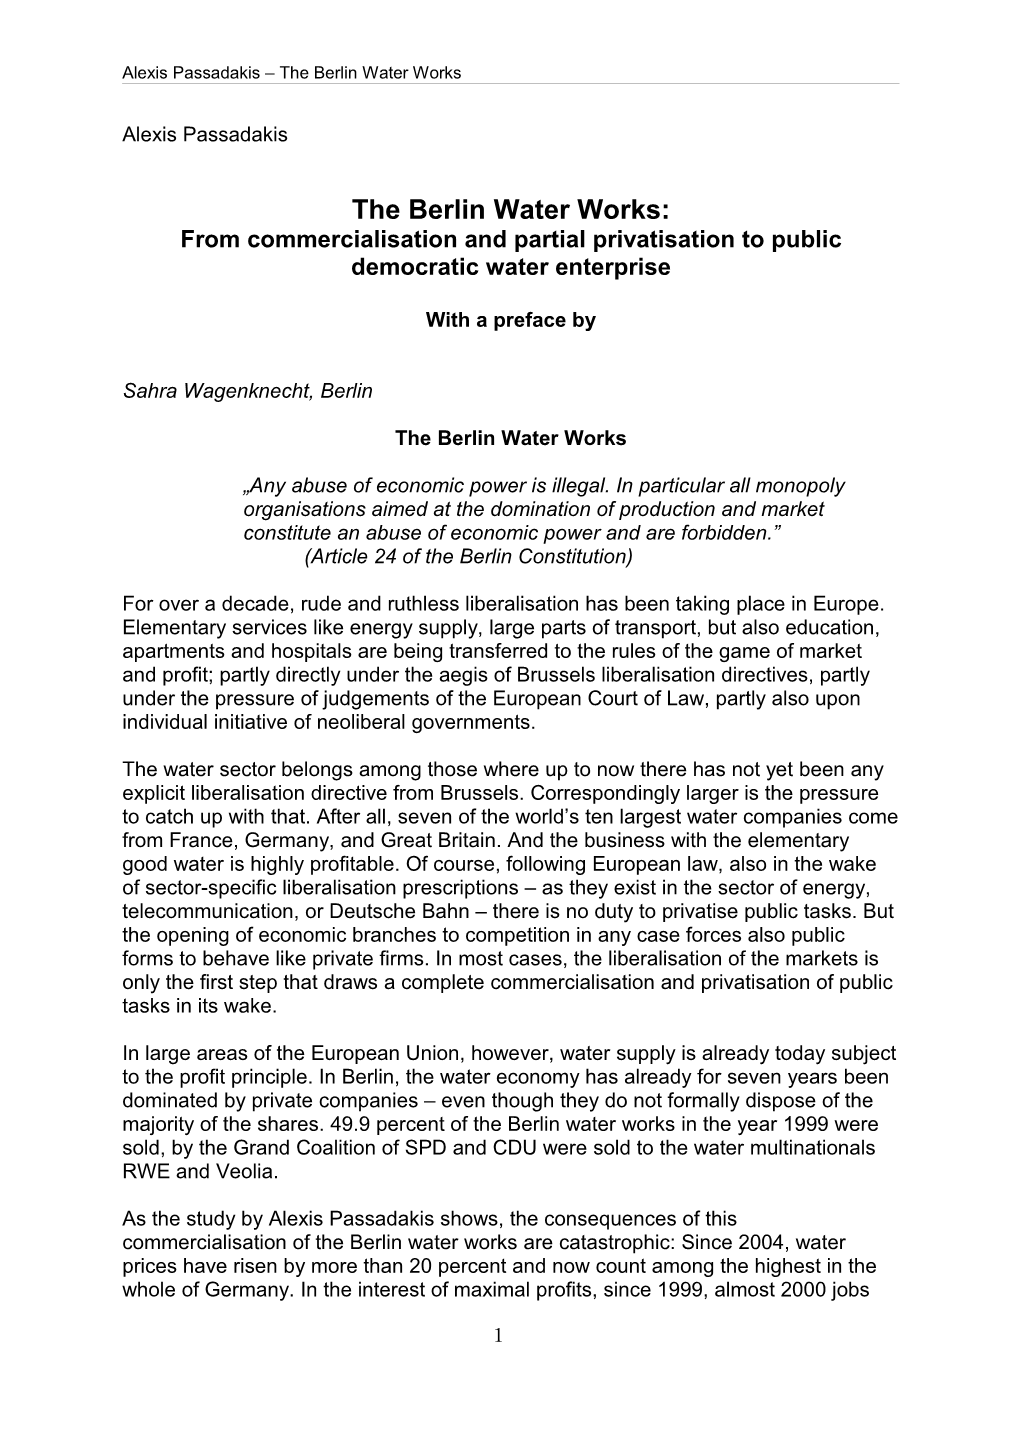 The Berlin Water Works: from Commercialisation and Partial Privatisation to Public Democratic Water Enterprise